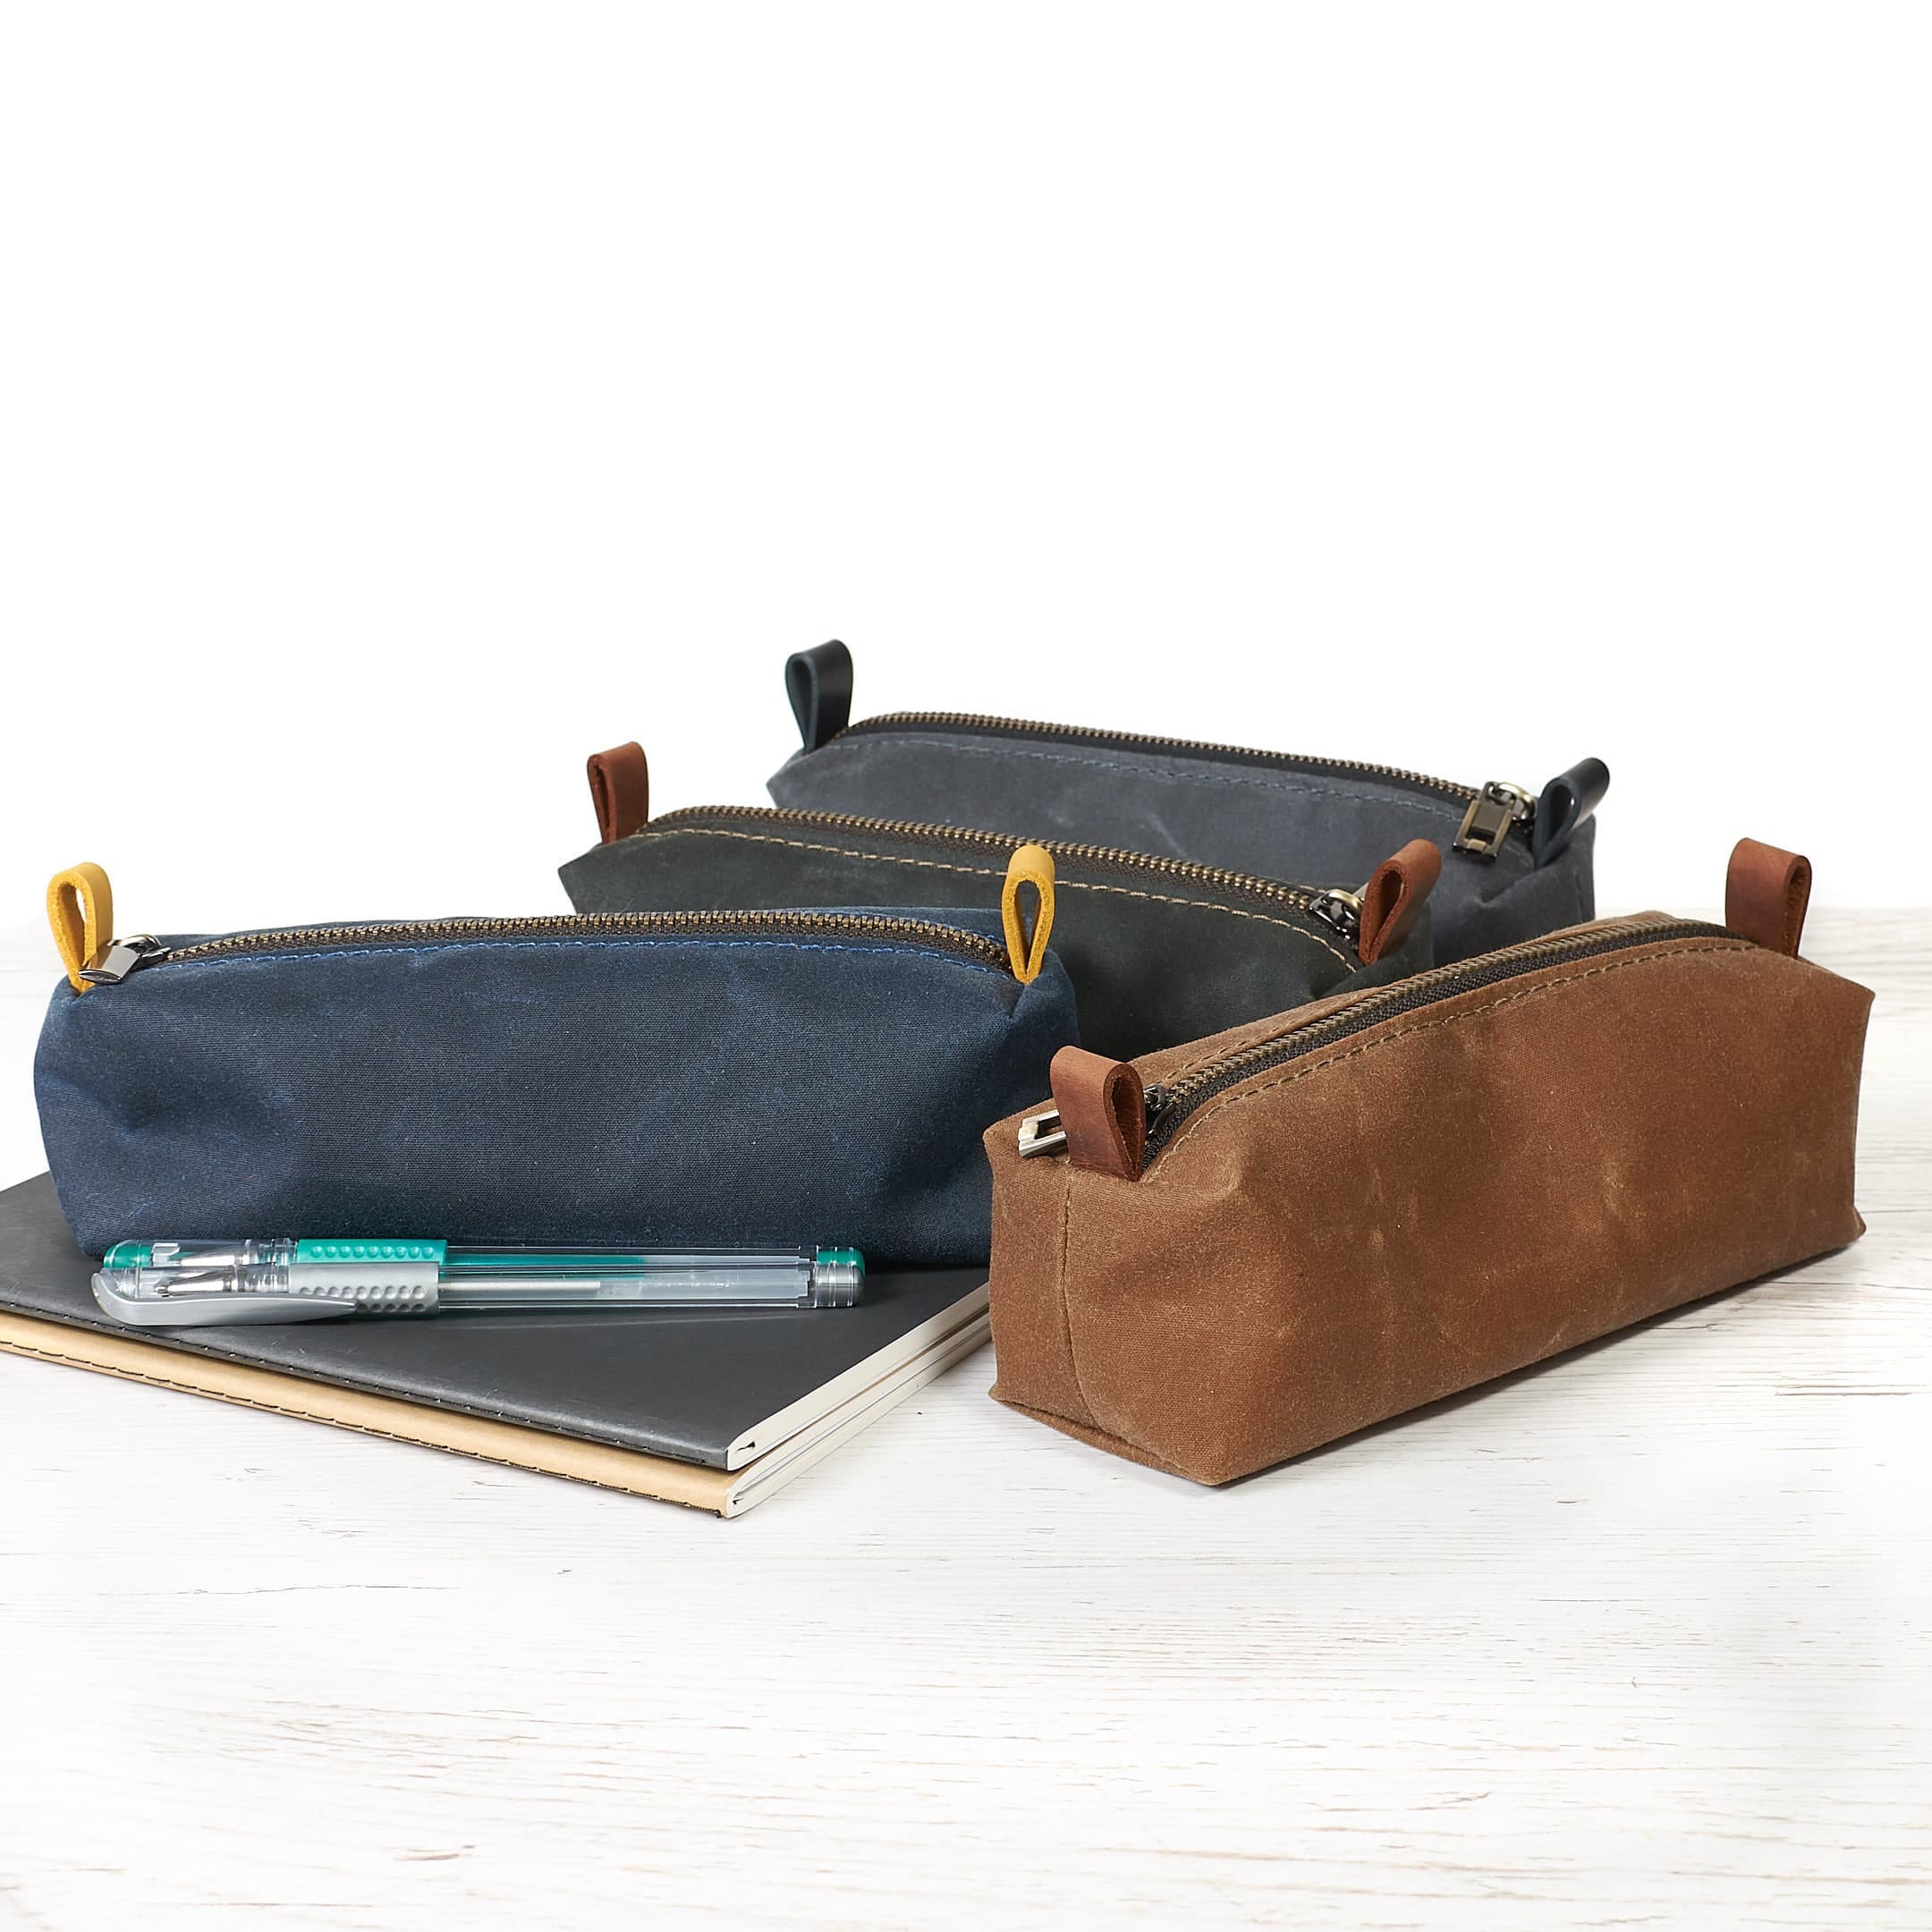 Waxed Canvas Pencil Case, Small Pencil Pouch, Small Make up Bag